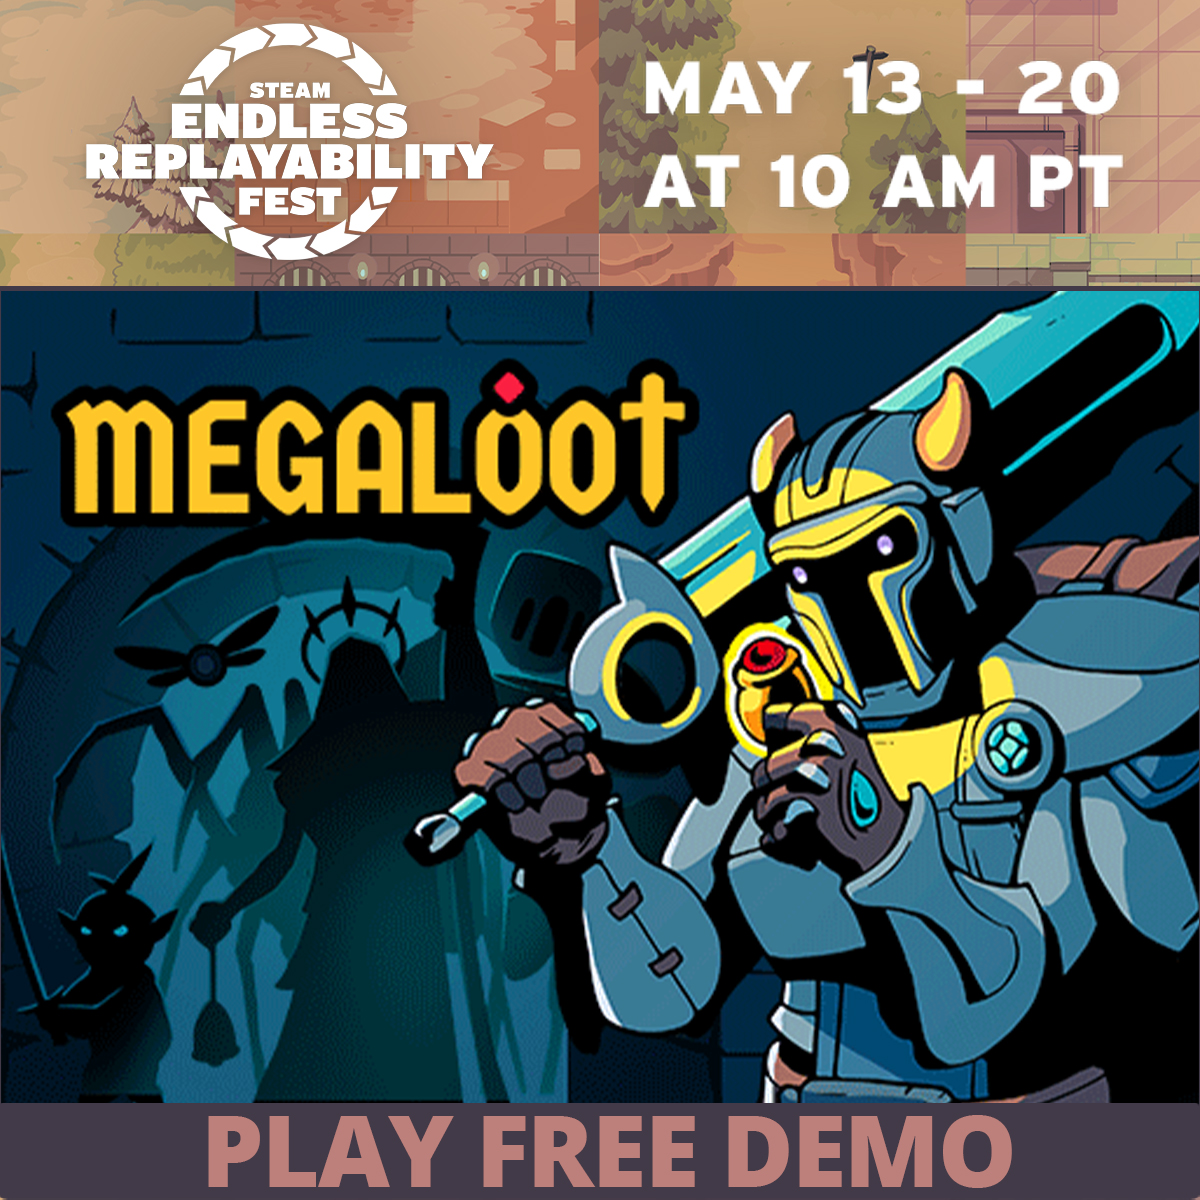 Today, we're participating at #Steam Endless Replayability Fest. ♾️ Take on Megaloot with us for loot, tactical battles, and endless adventures. Don't miss out on the fun! Play the Free Demo: 👉 ravenage.ink/3SNwVJI #godot | #indiedev | #gamedev | #pixelart